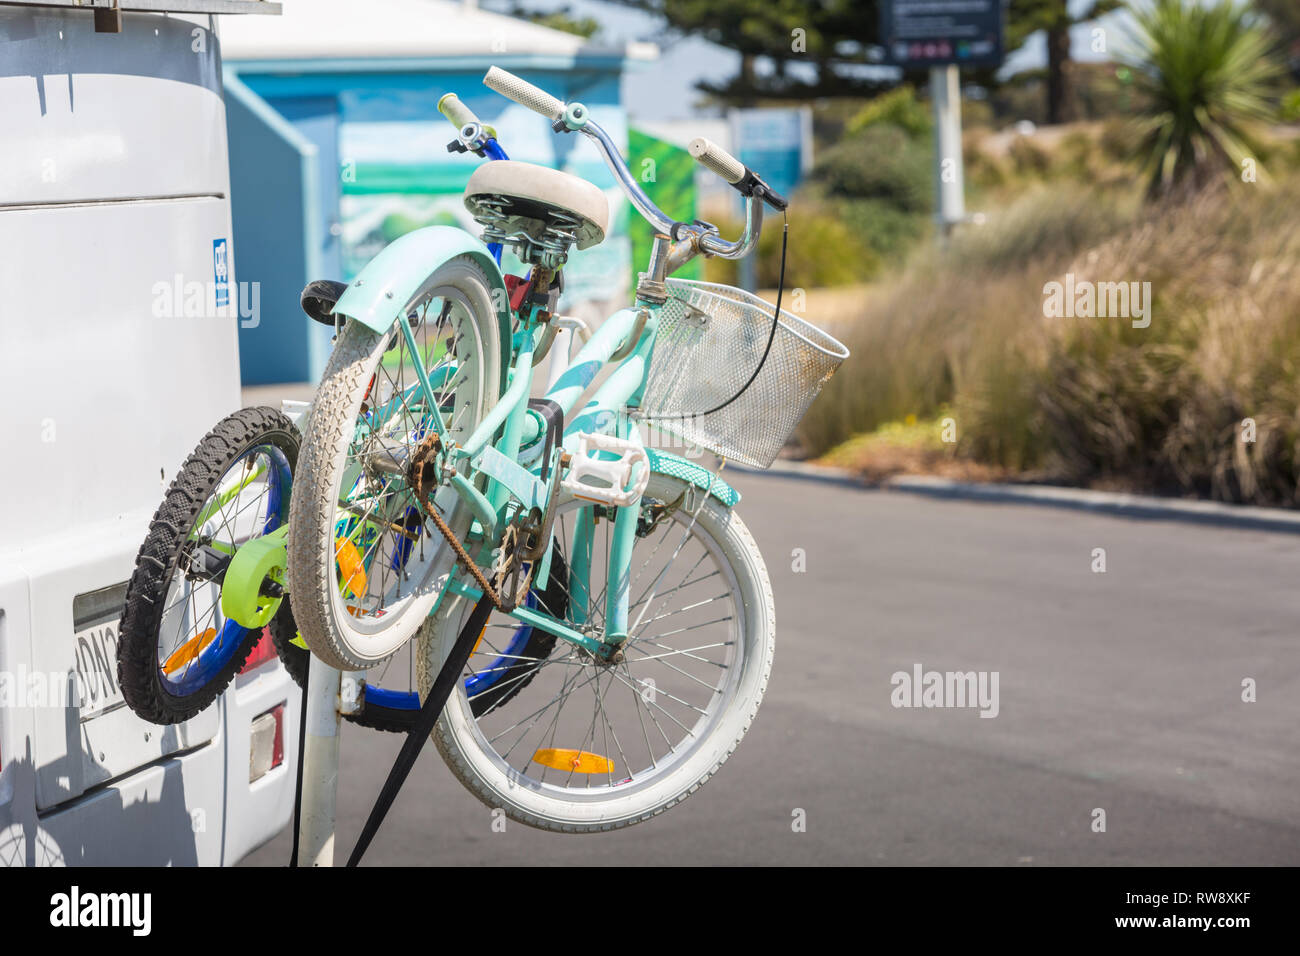 Childrens bicycles mounted on the back of a holiday campervan Stock Photo